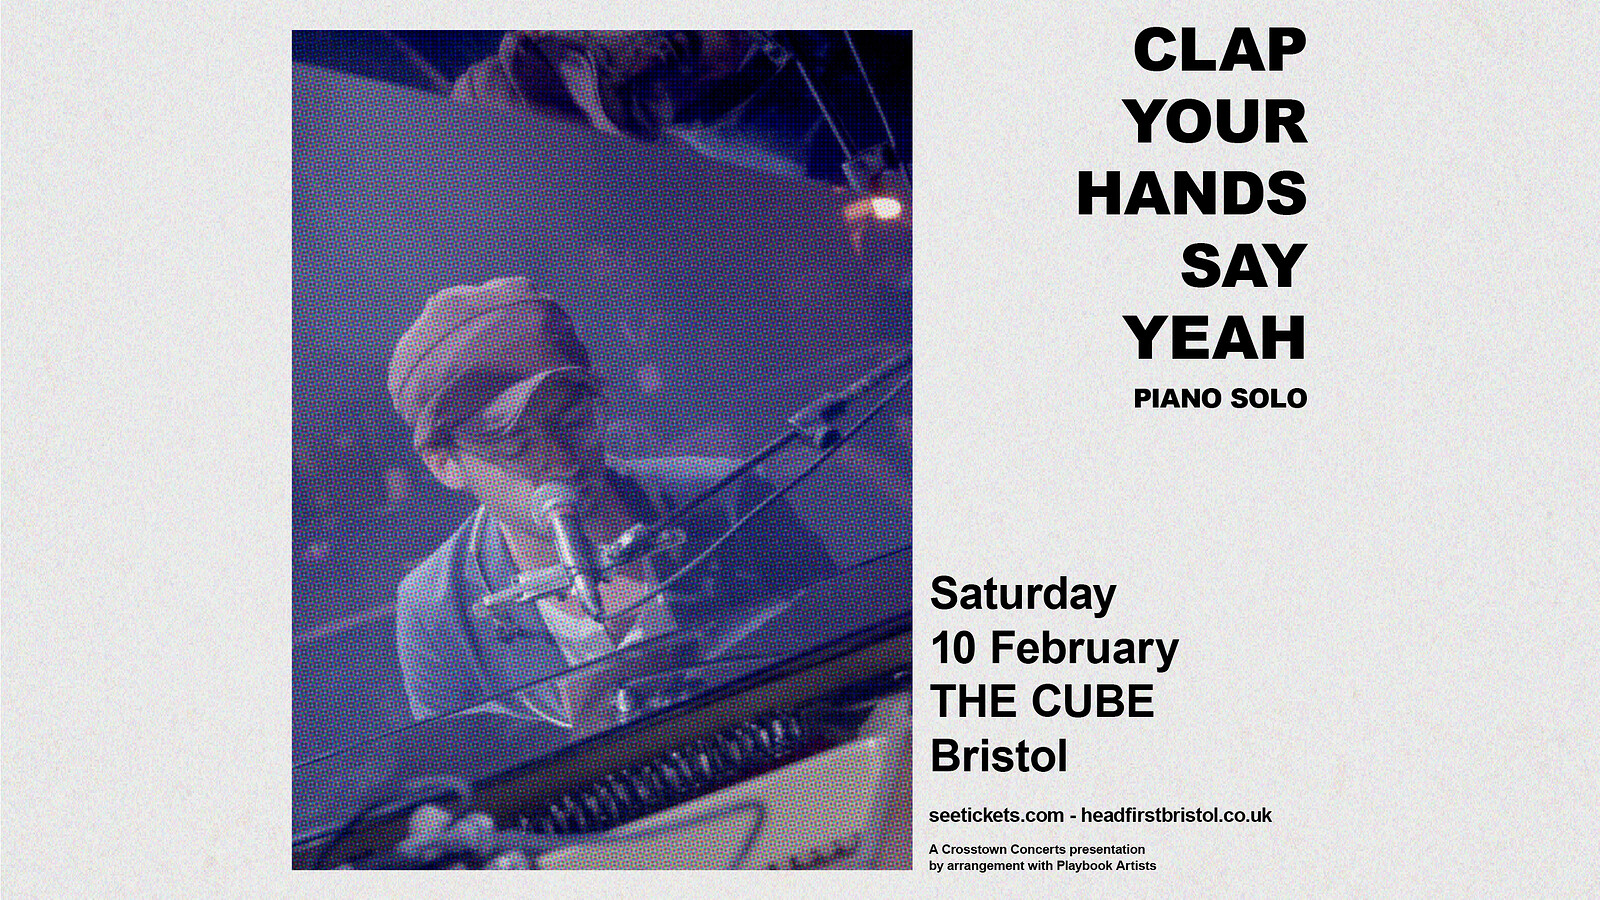 A Piano Performance from Clap Your Hands Say Yeah at The Cube